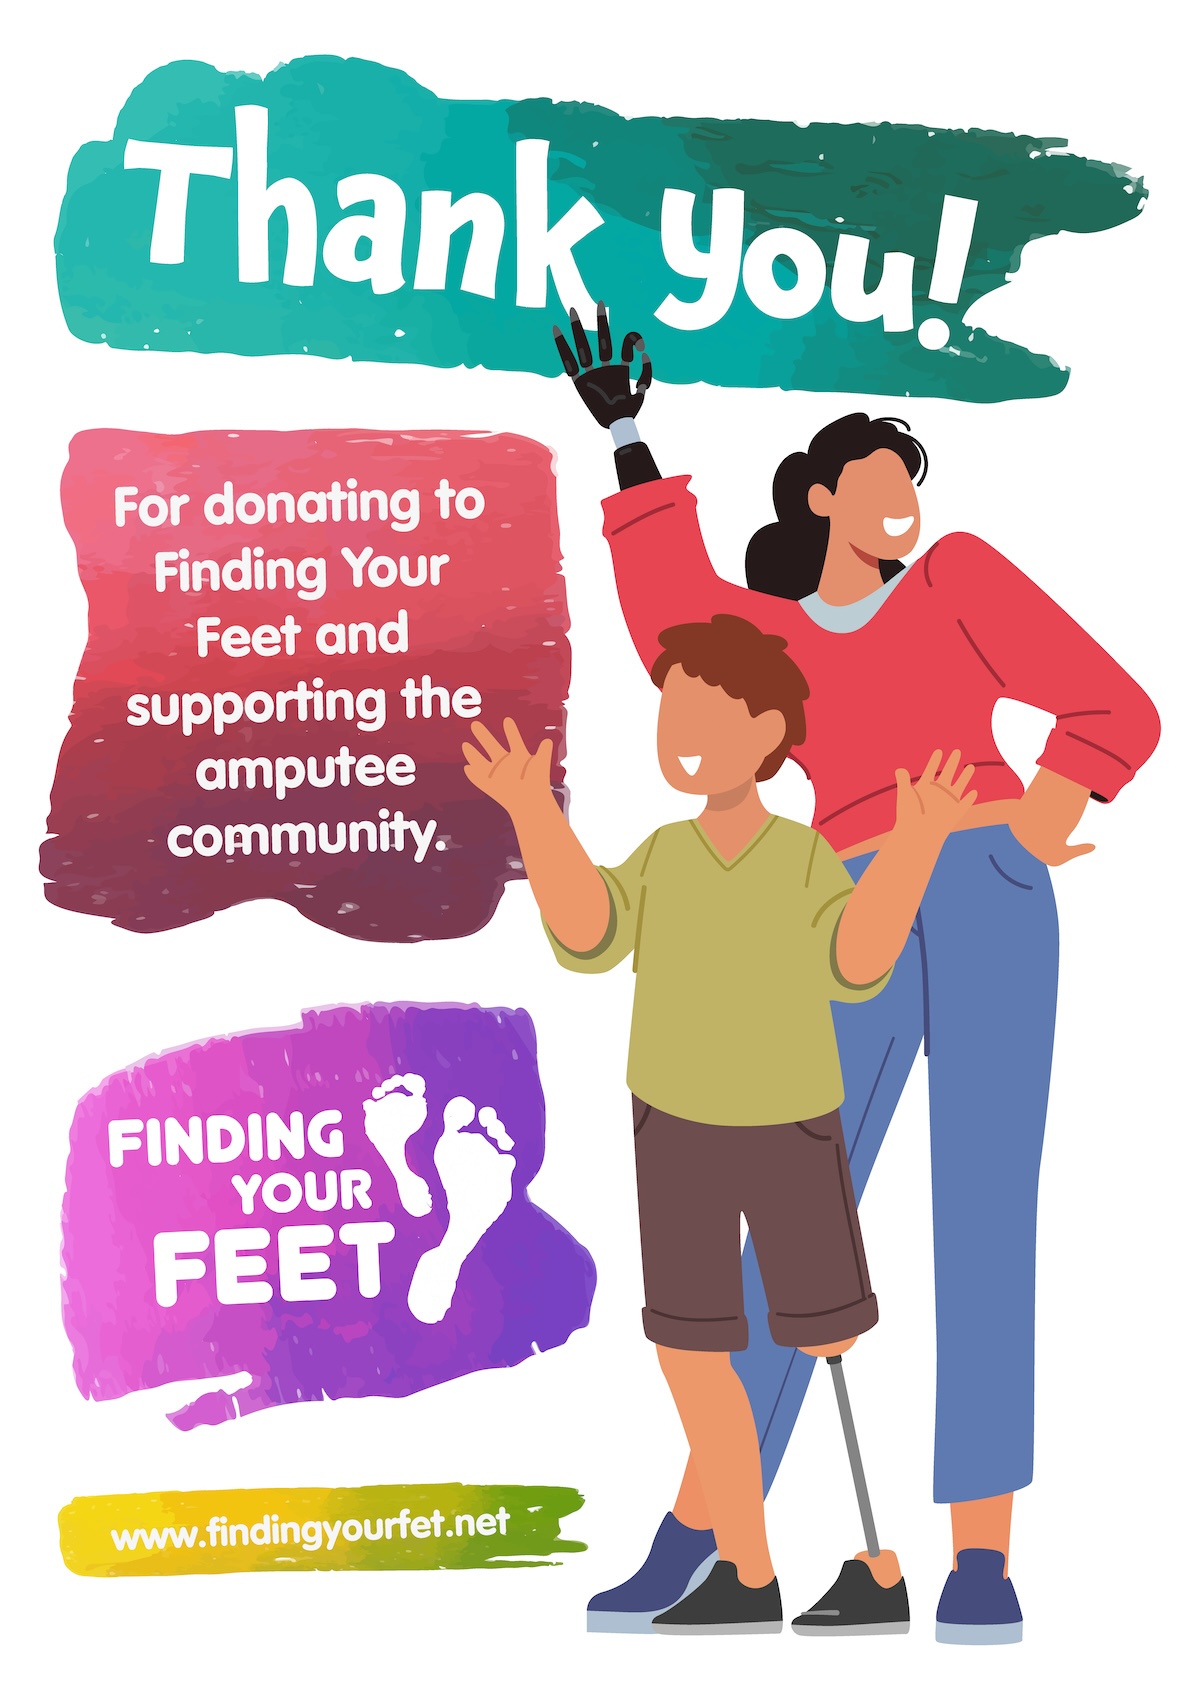 Thank you for donating to Finding Your Feet